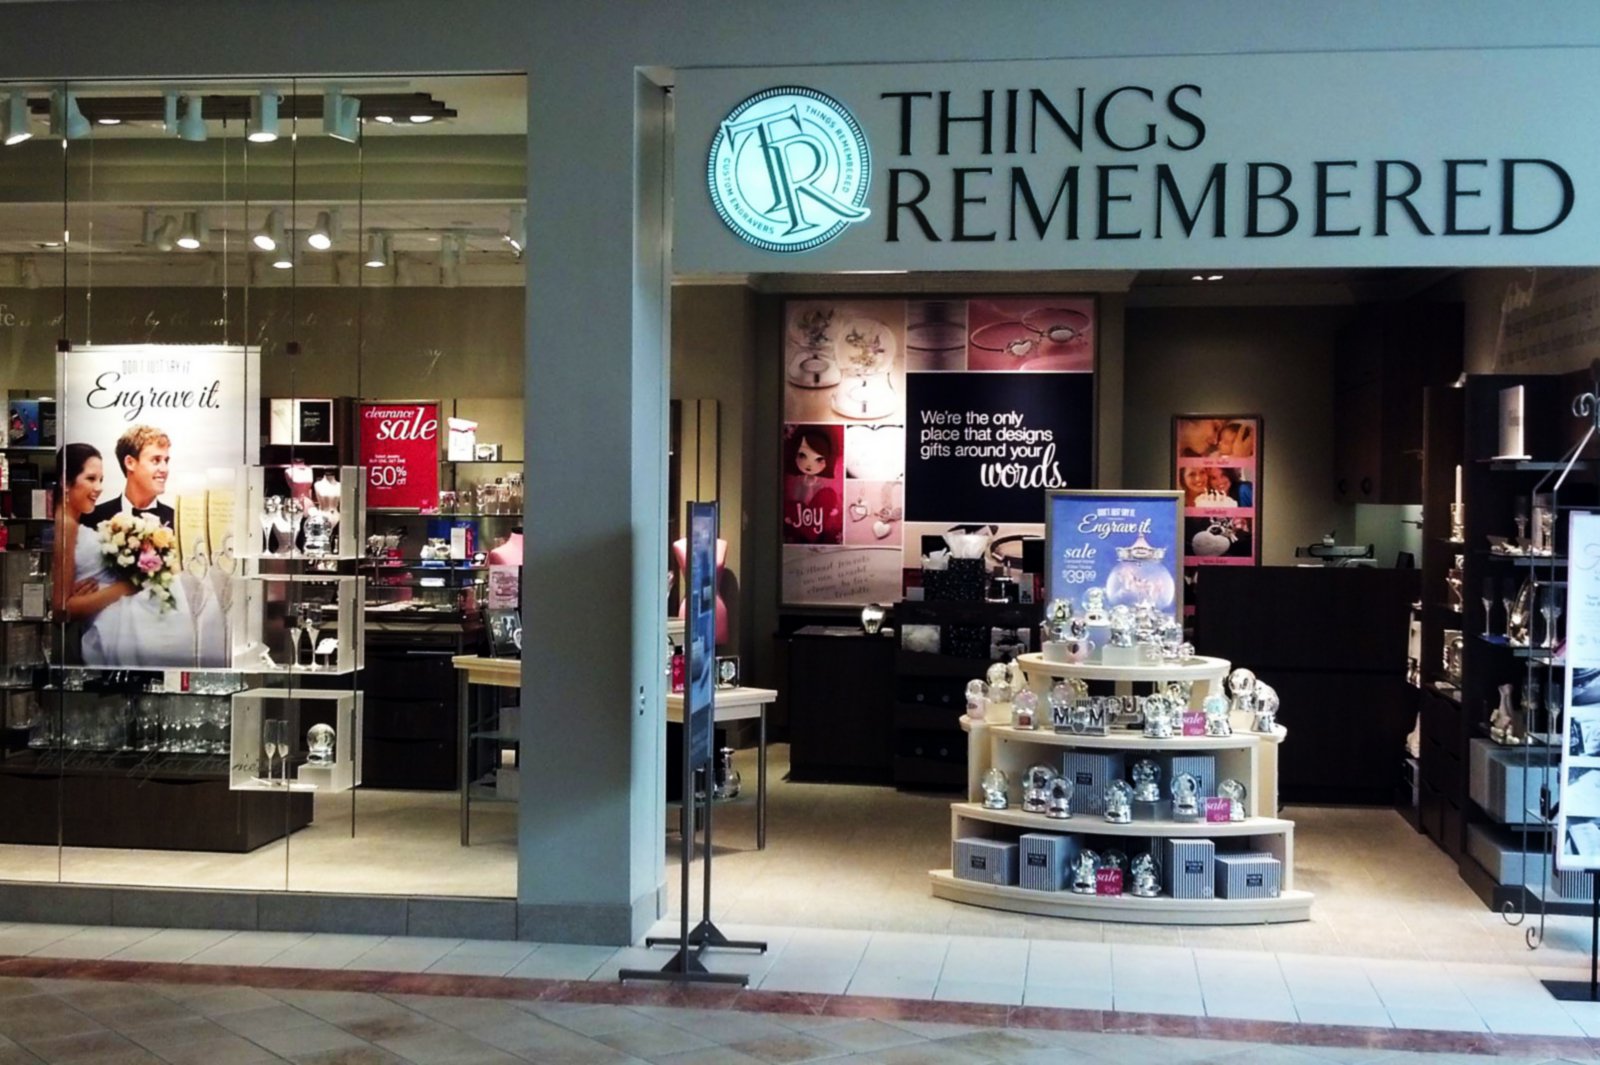 things remembered return policy